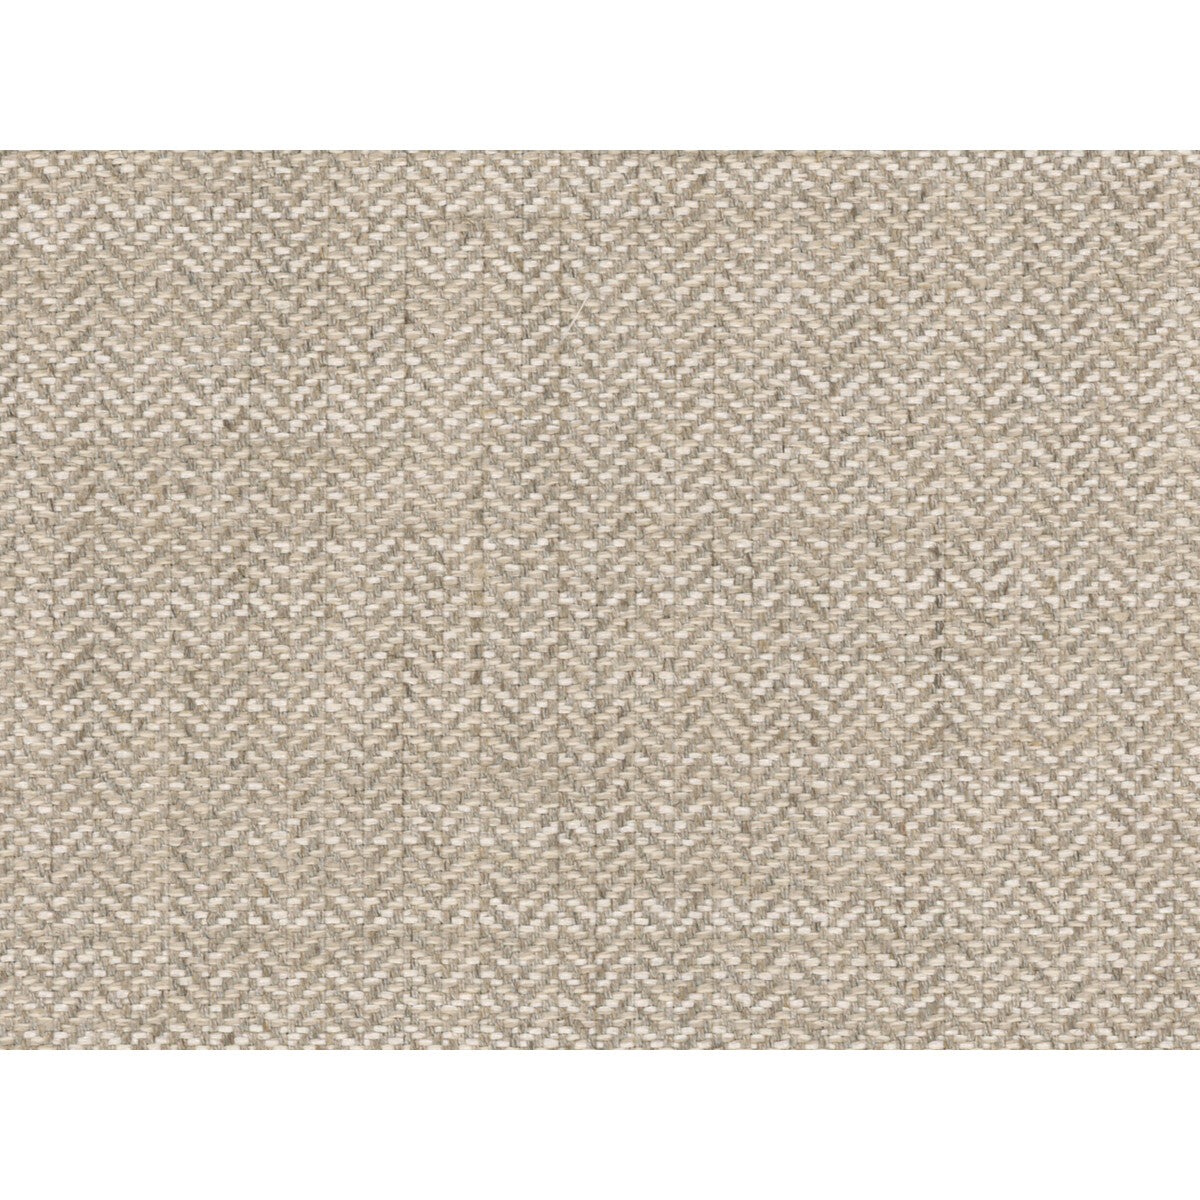 Art Spark fabric in opal color - pattern 34409.16.0 - by Kravet Couture